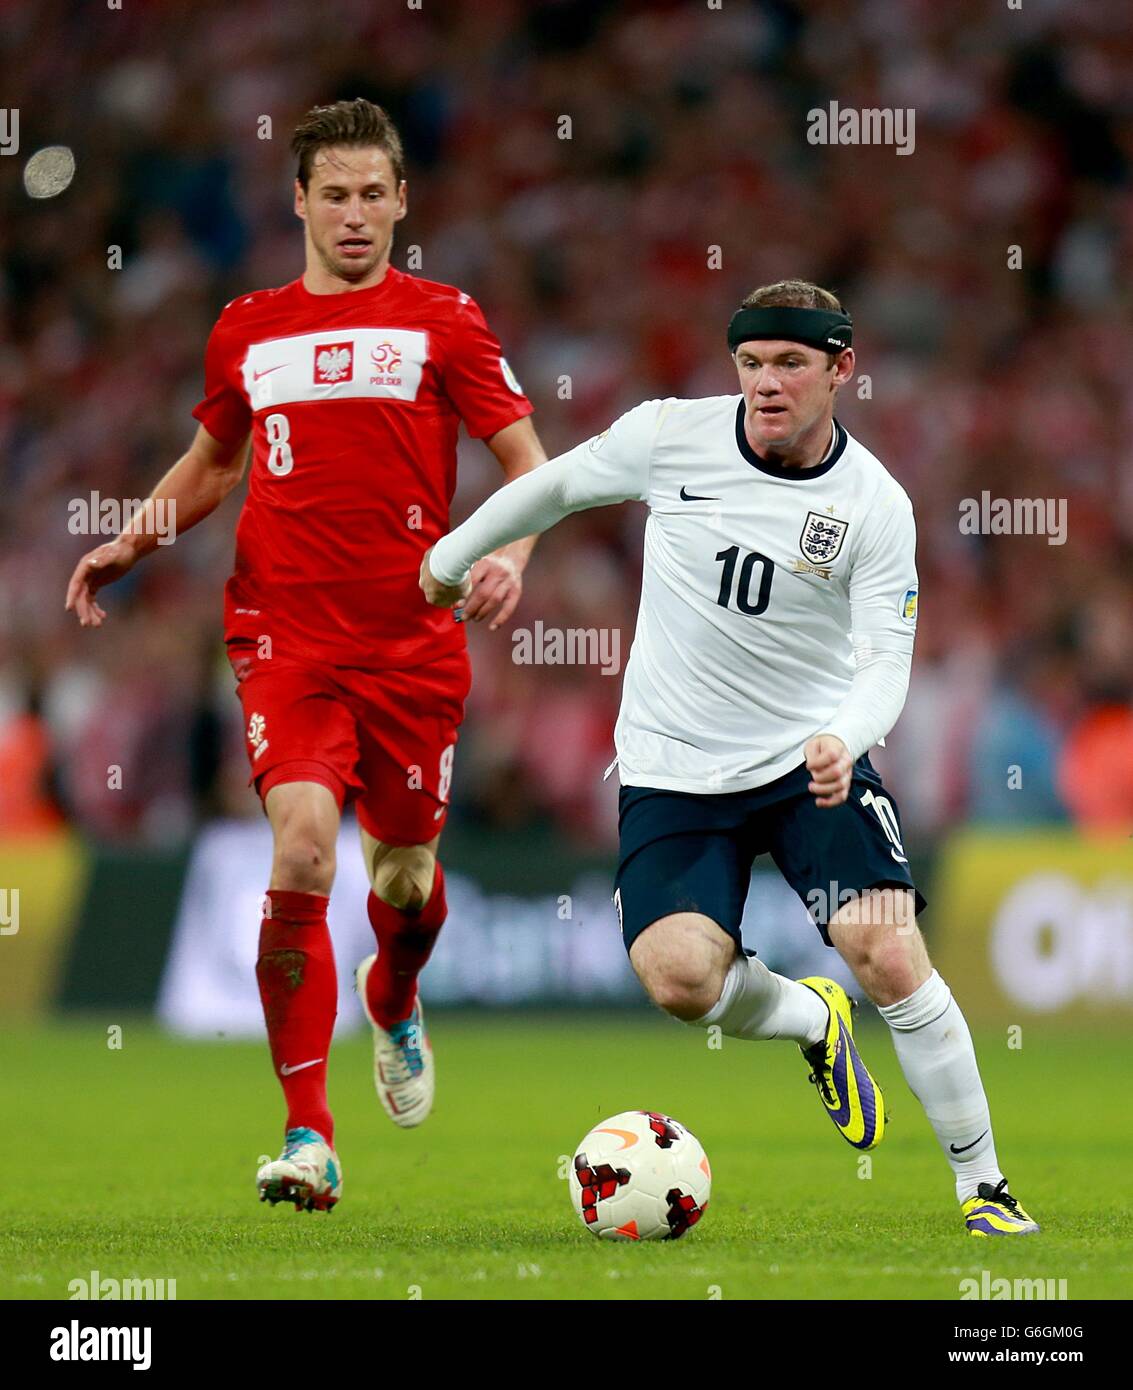 England's Wayne Rooney (right) in action with Poland's Grzegorz Krychowiak Stock Photo